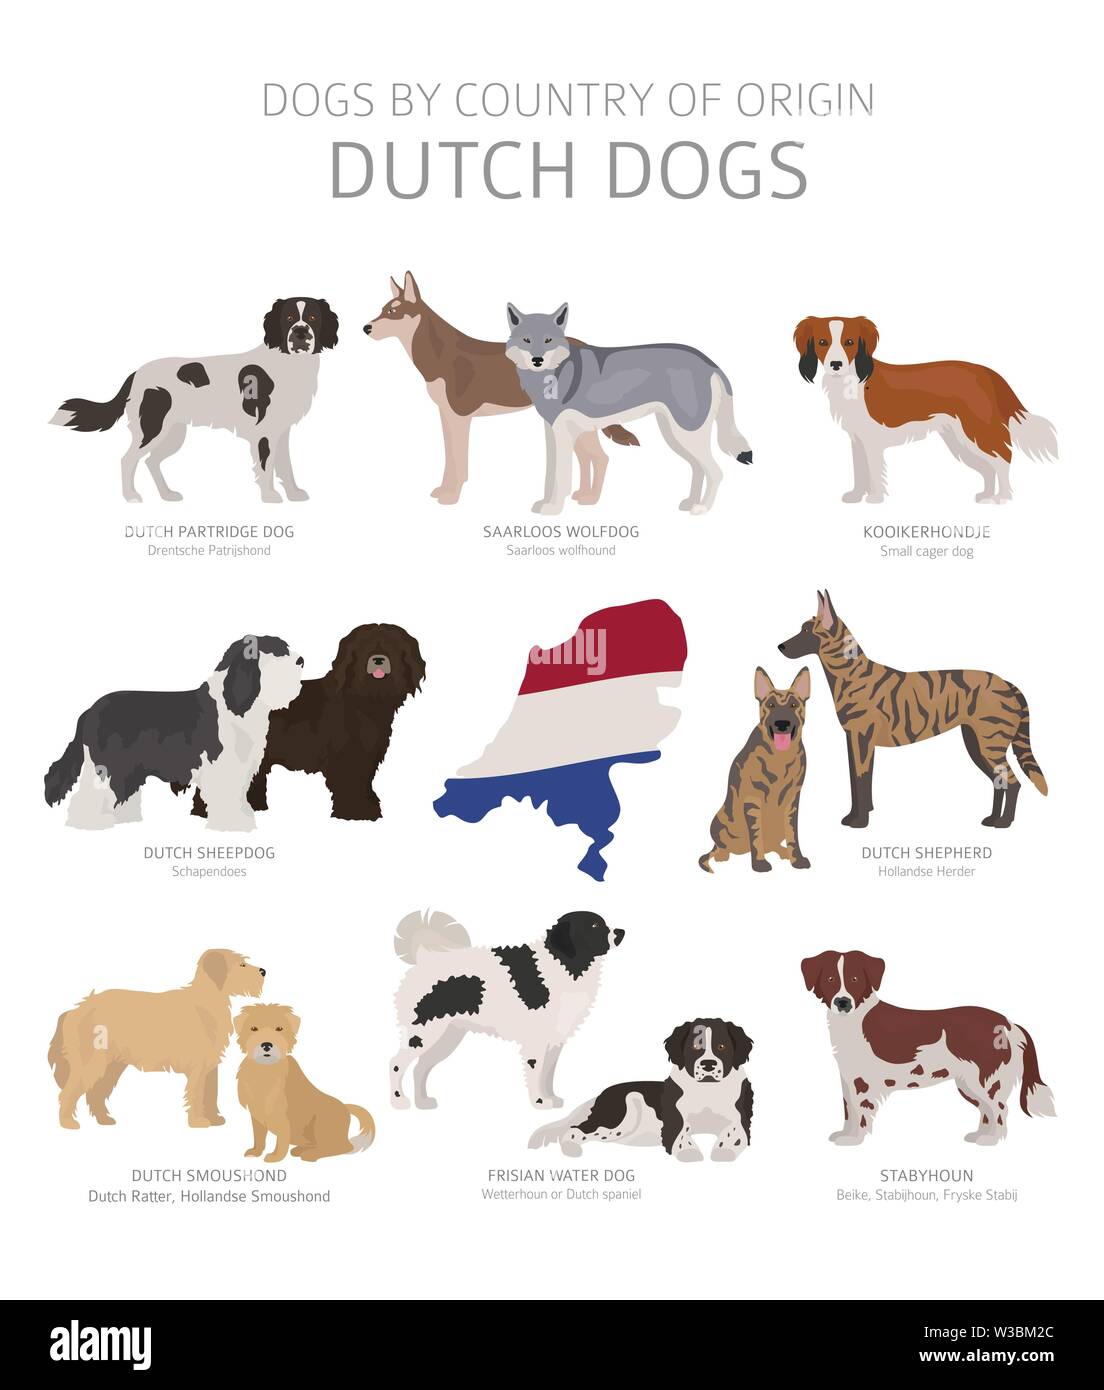 Dogs by country of origin. Dutch dog breeds. Shepherds, hunting, herding, toy, working and service dogs  set.  Vector illustration Stock Vector